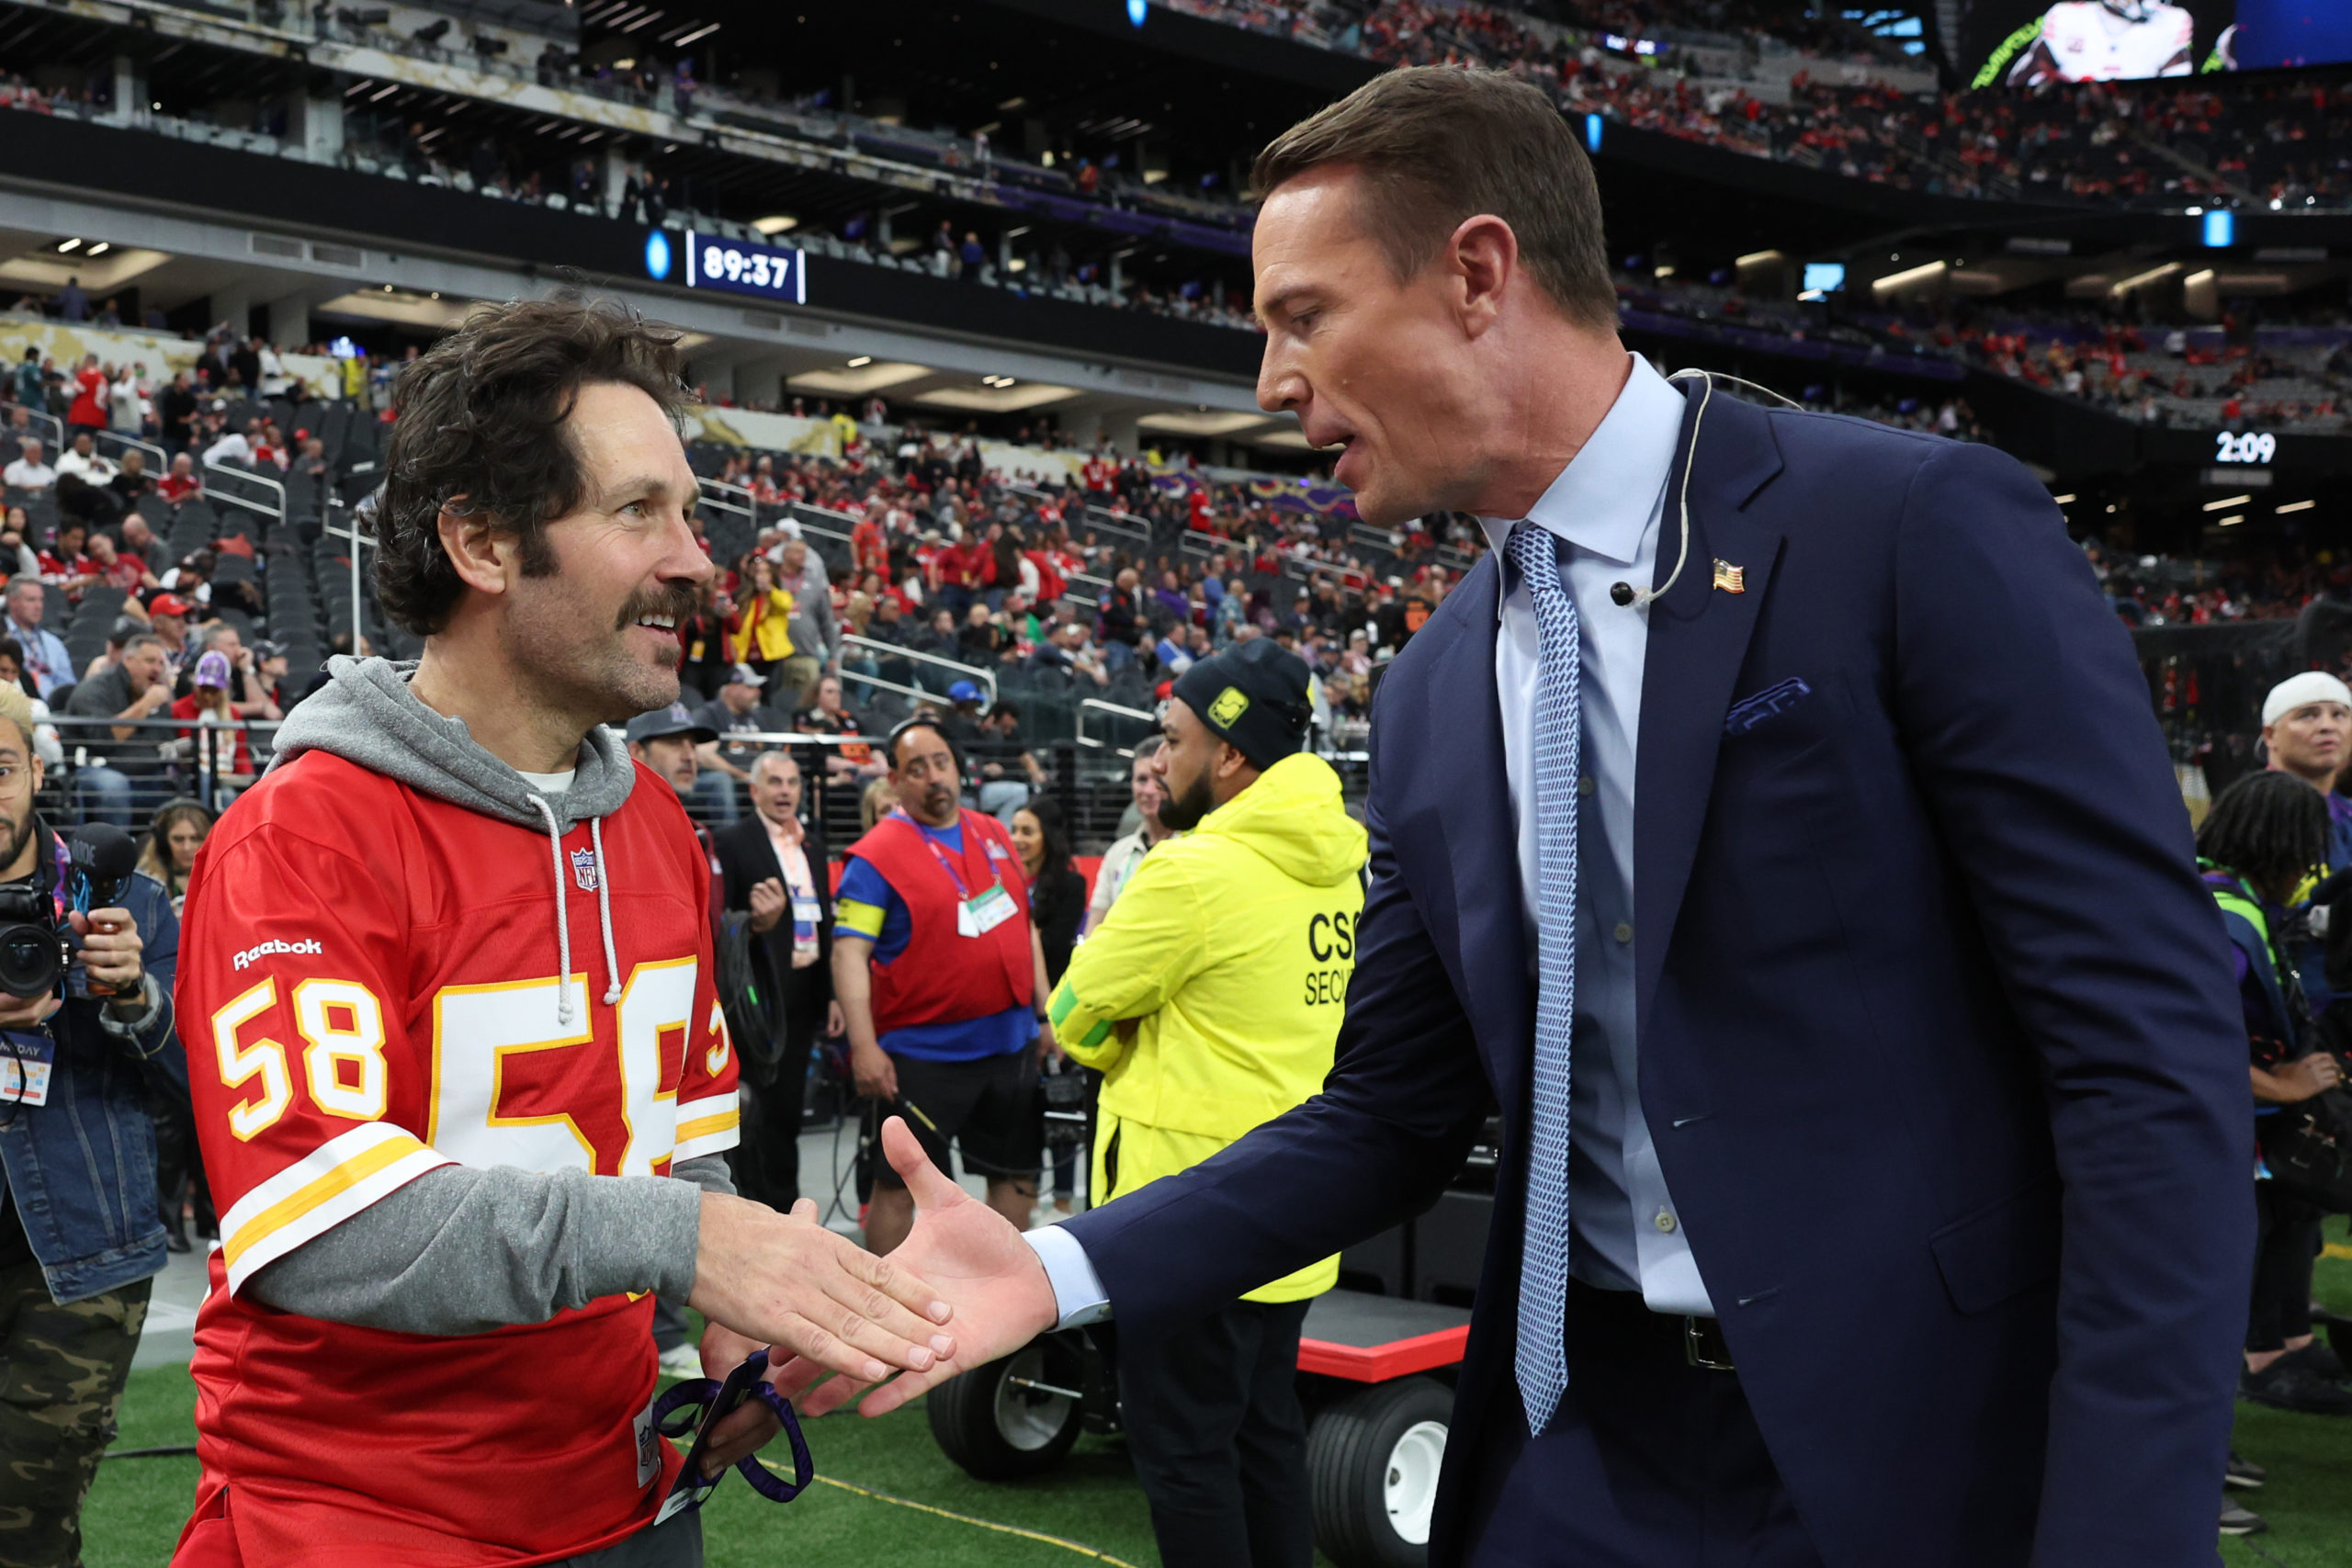 LAS VEGAS, NEVADA - FEBRUARY 11: Paul Rudd shakes hands with Matt Ryan before Super Bowl LVIII between the Kansas City Chiefs and the San Francisco 49ers at Allegiant Stadium on February 11, 2024 in Las Vegas, Nevada. Jamie Squire/Getty Images